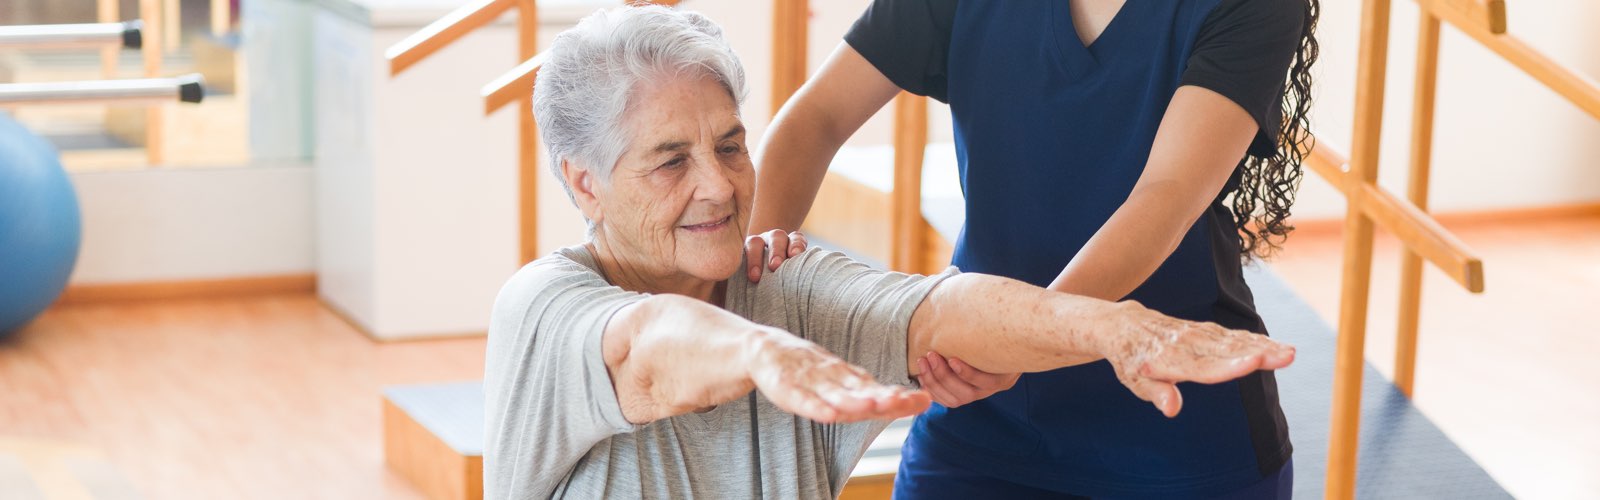 Physical therapist holding older patient's arms outstretched